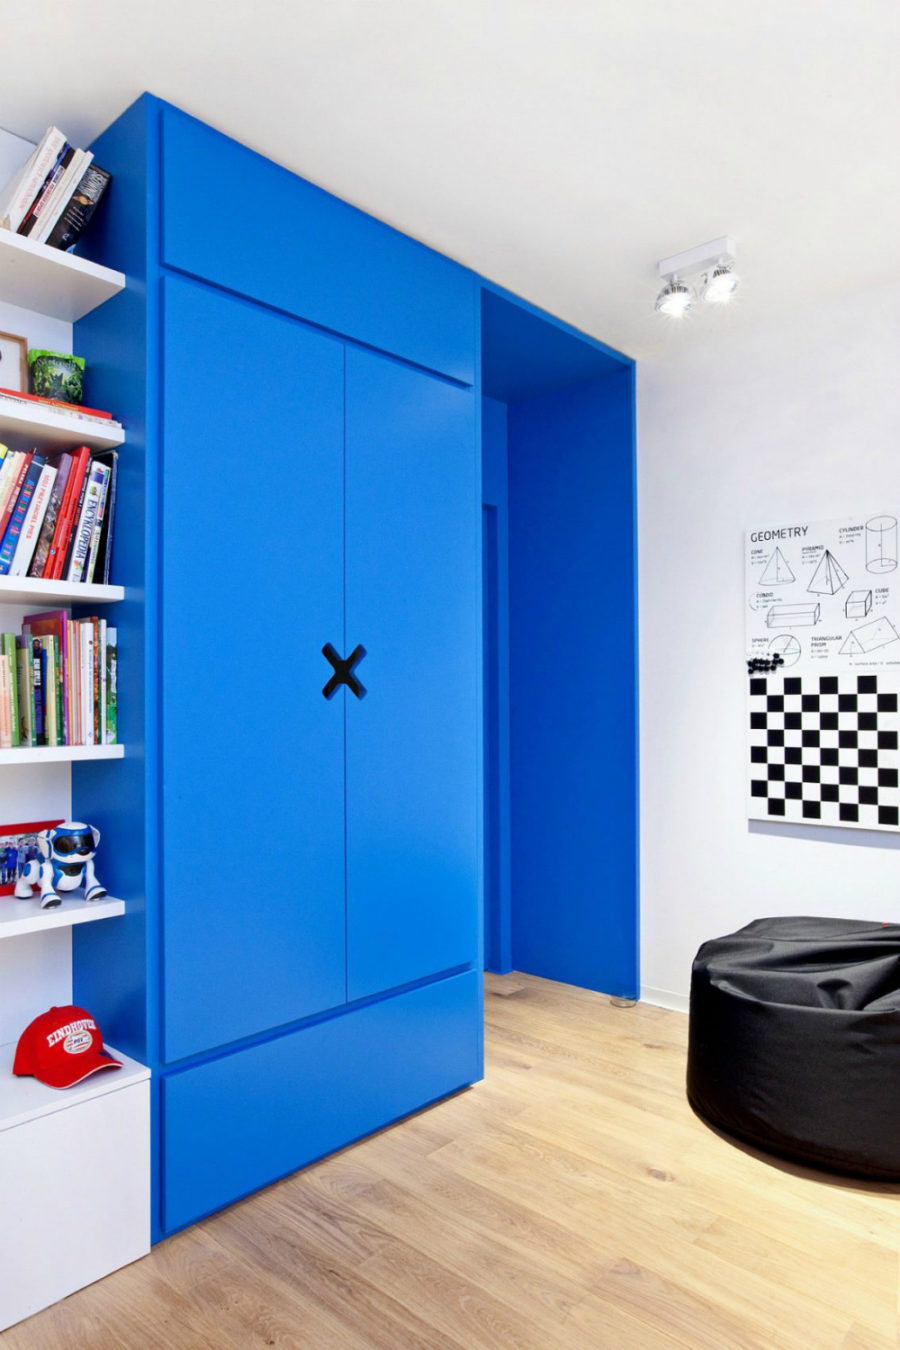 Bright blue closet makes for another bright element in a white room